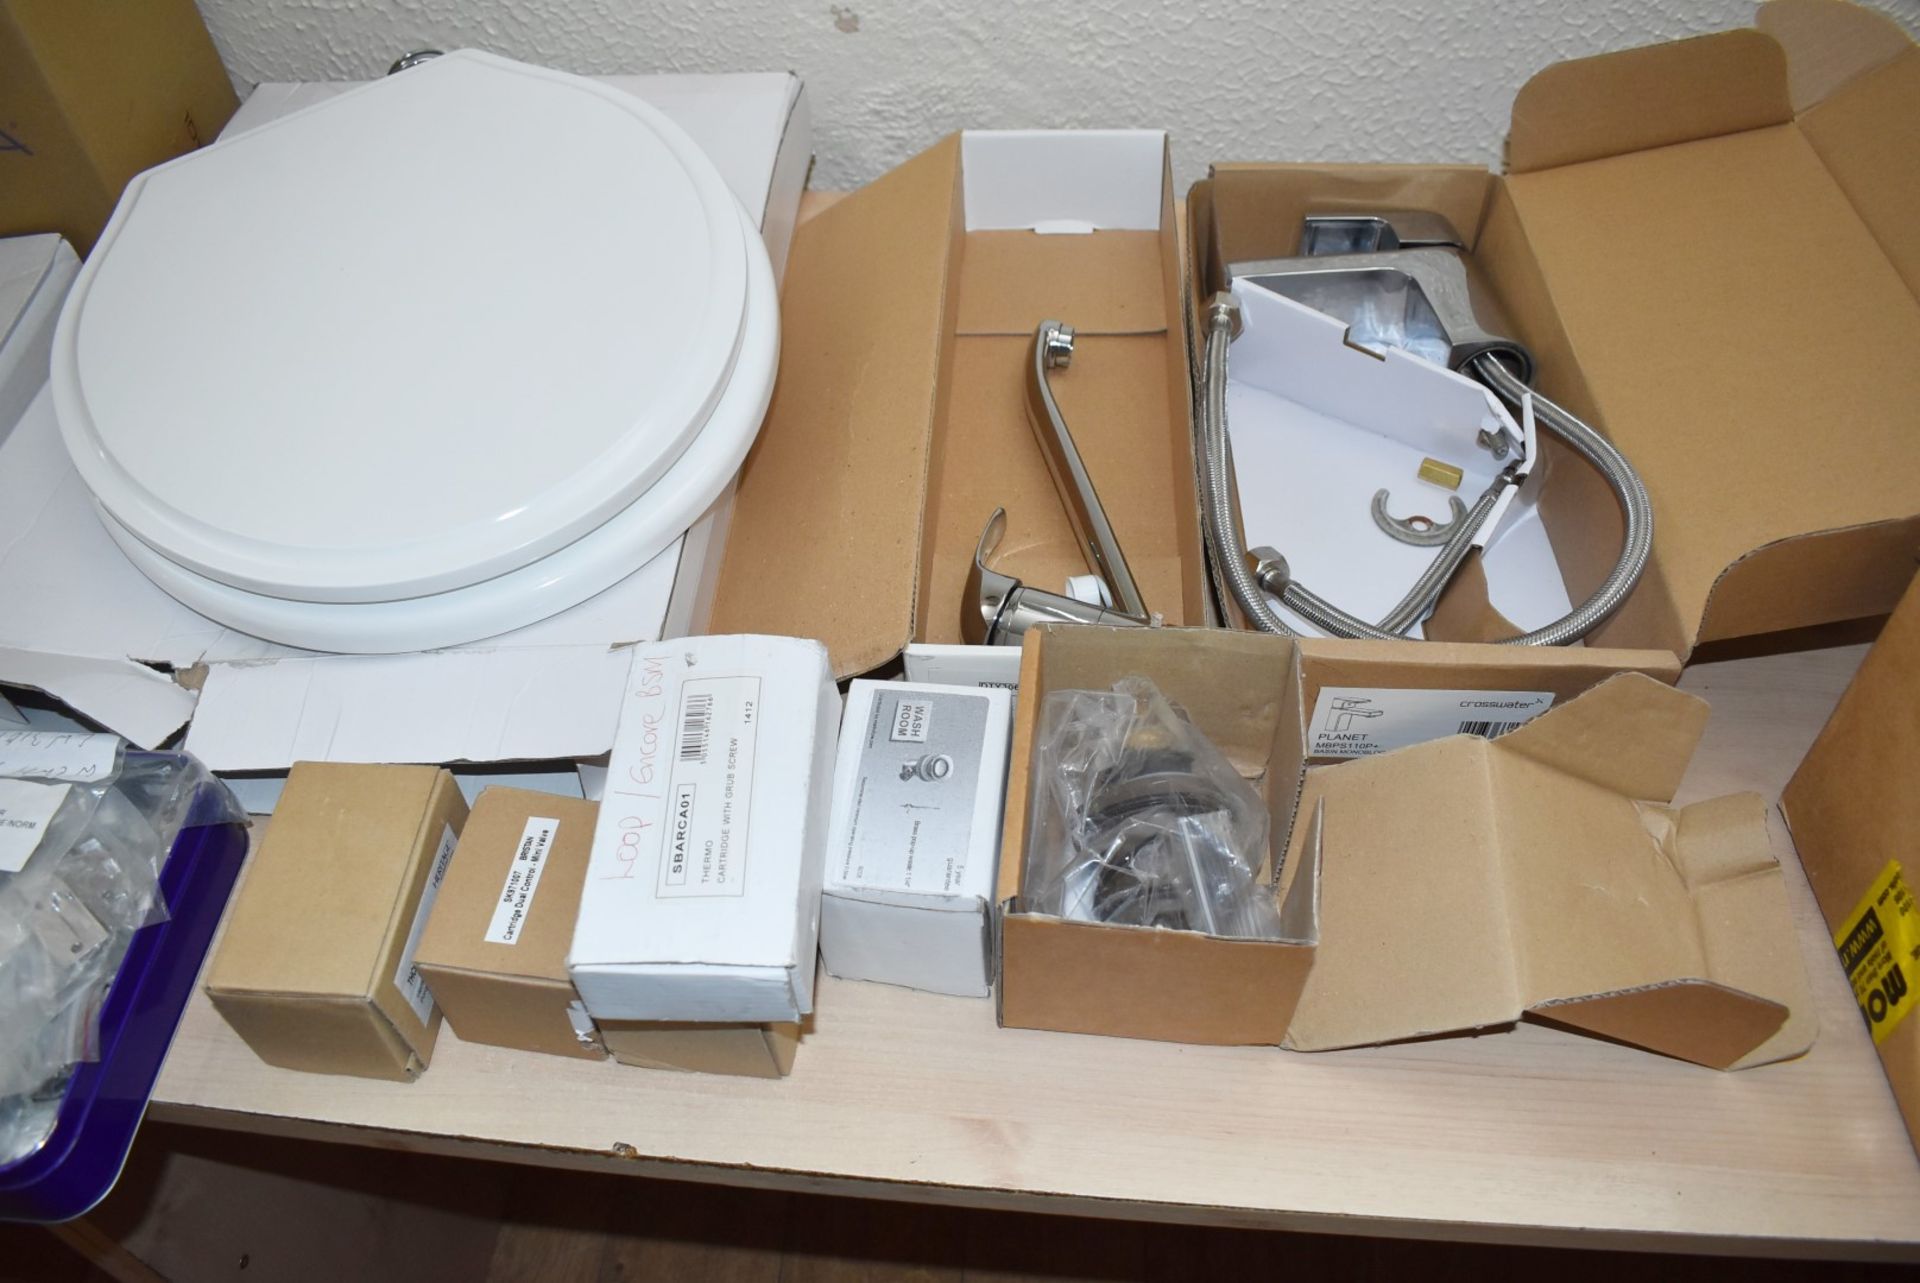 1 x Assorted Collection of Bathroom Accessories Including Toilet Seats, Brassware, Fittings - Image 6 of 10